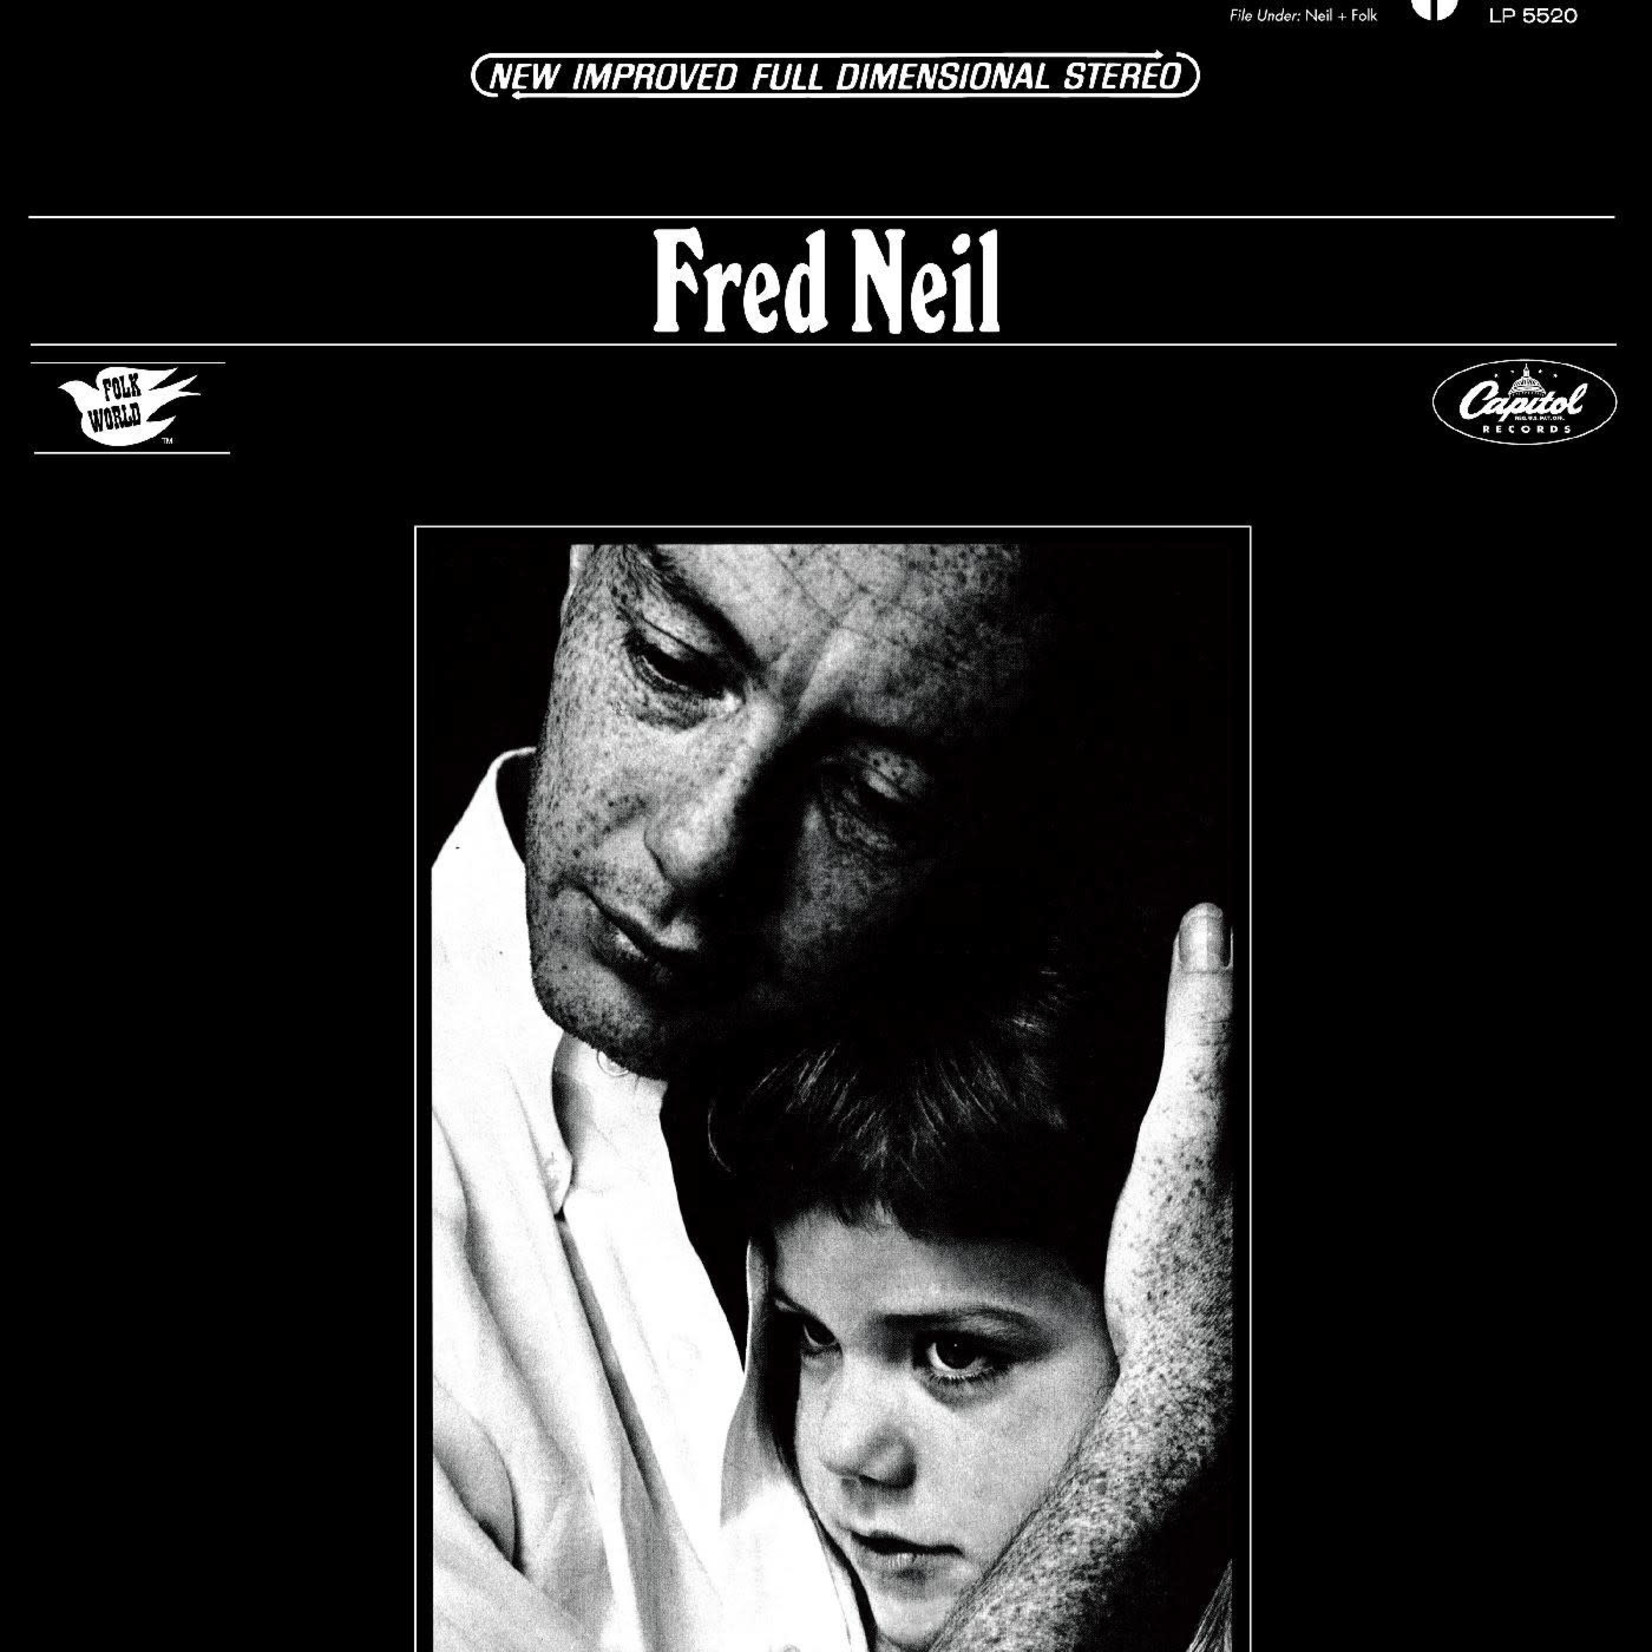 [New] Fred Neil - Fred Neil (clear vinyl)